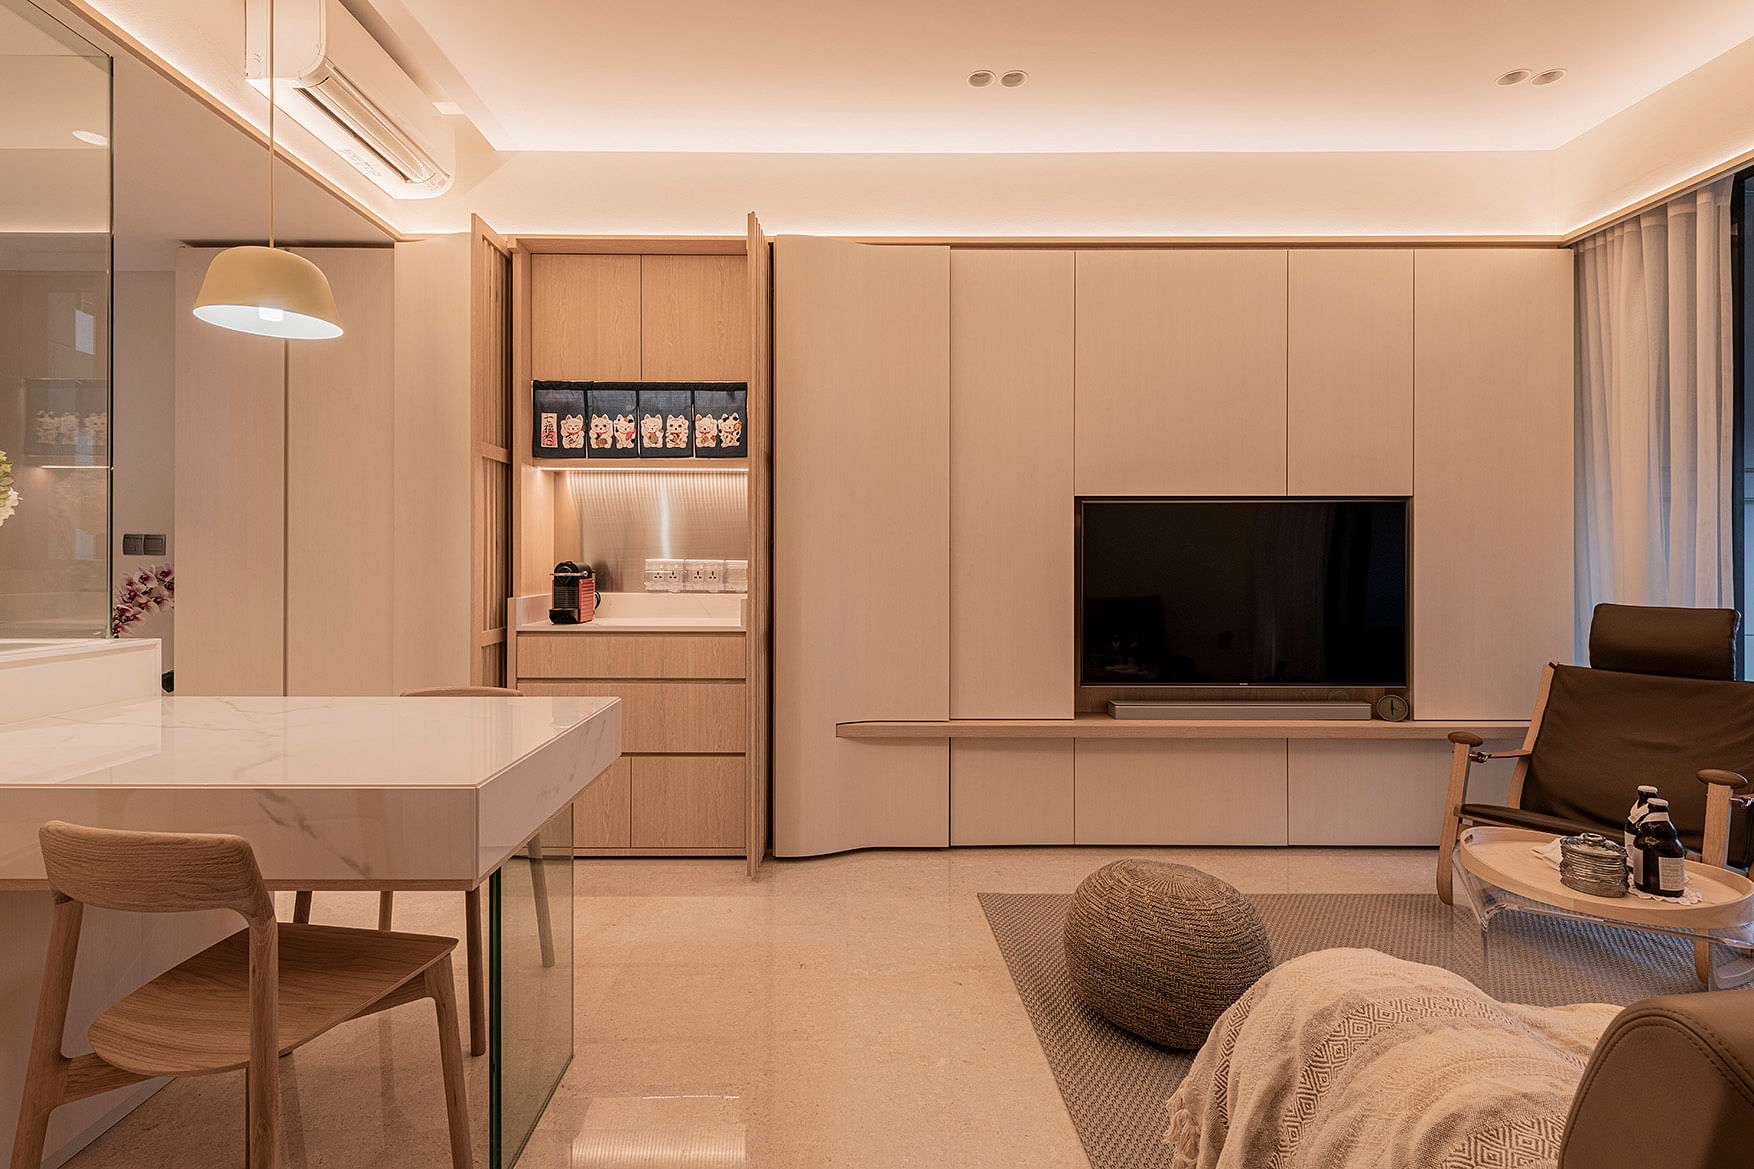 House Tour: Two-bedroom condominium apartment with minimalist and sleek